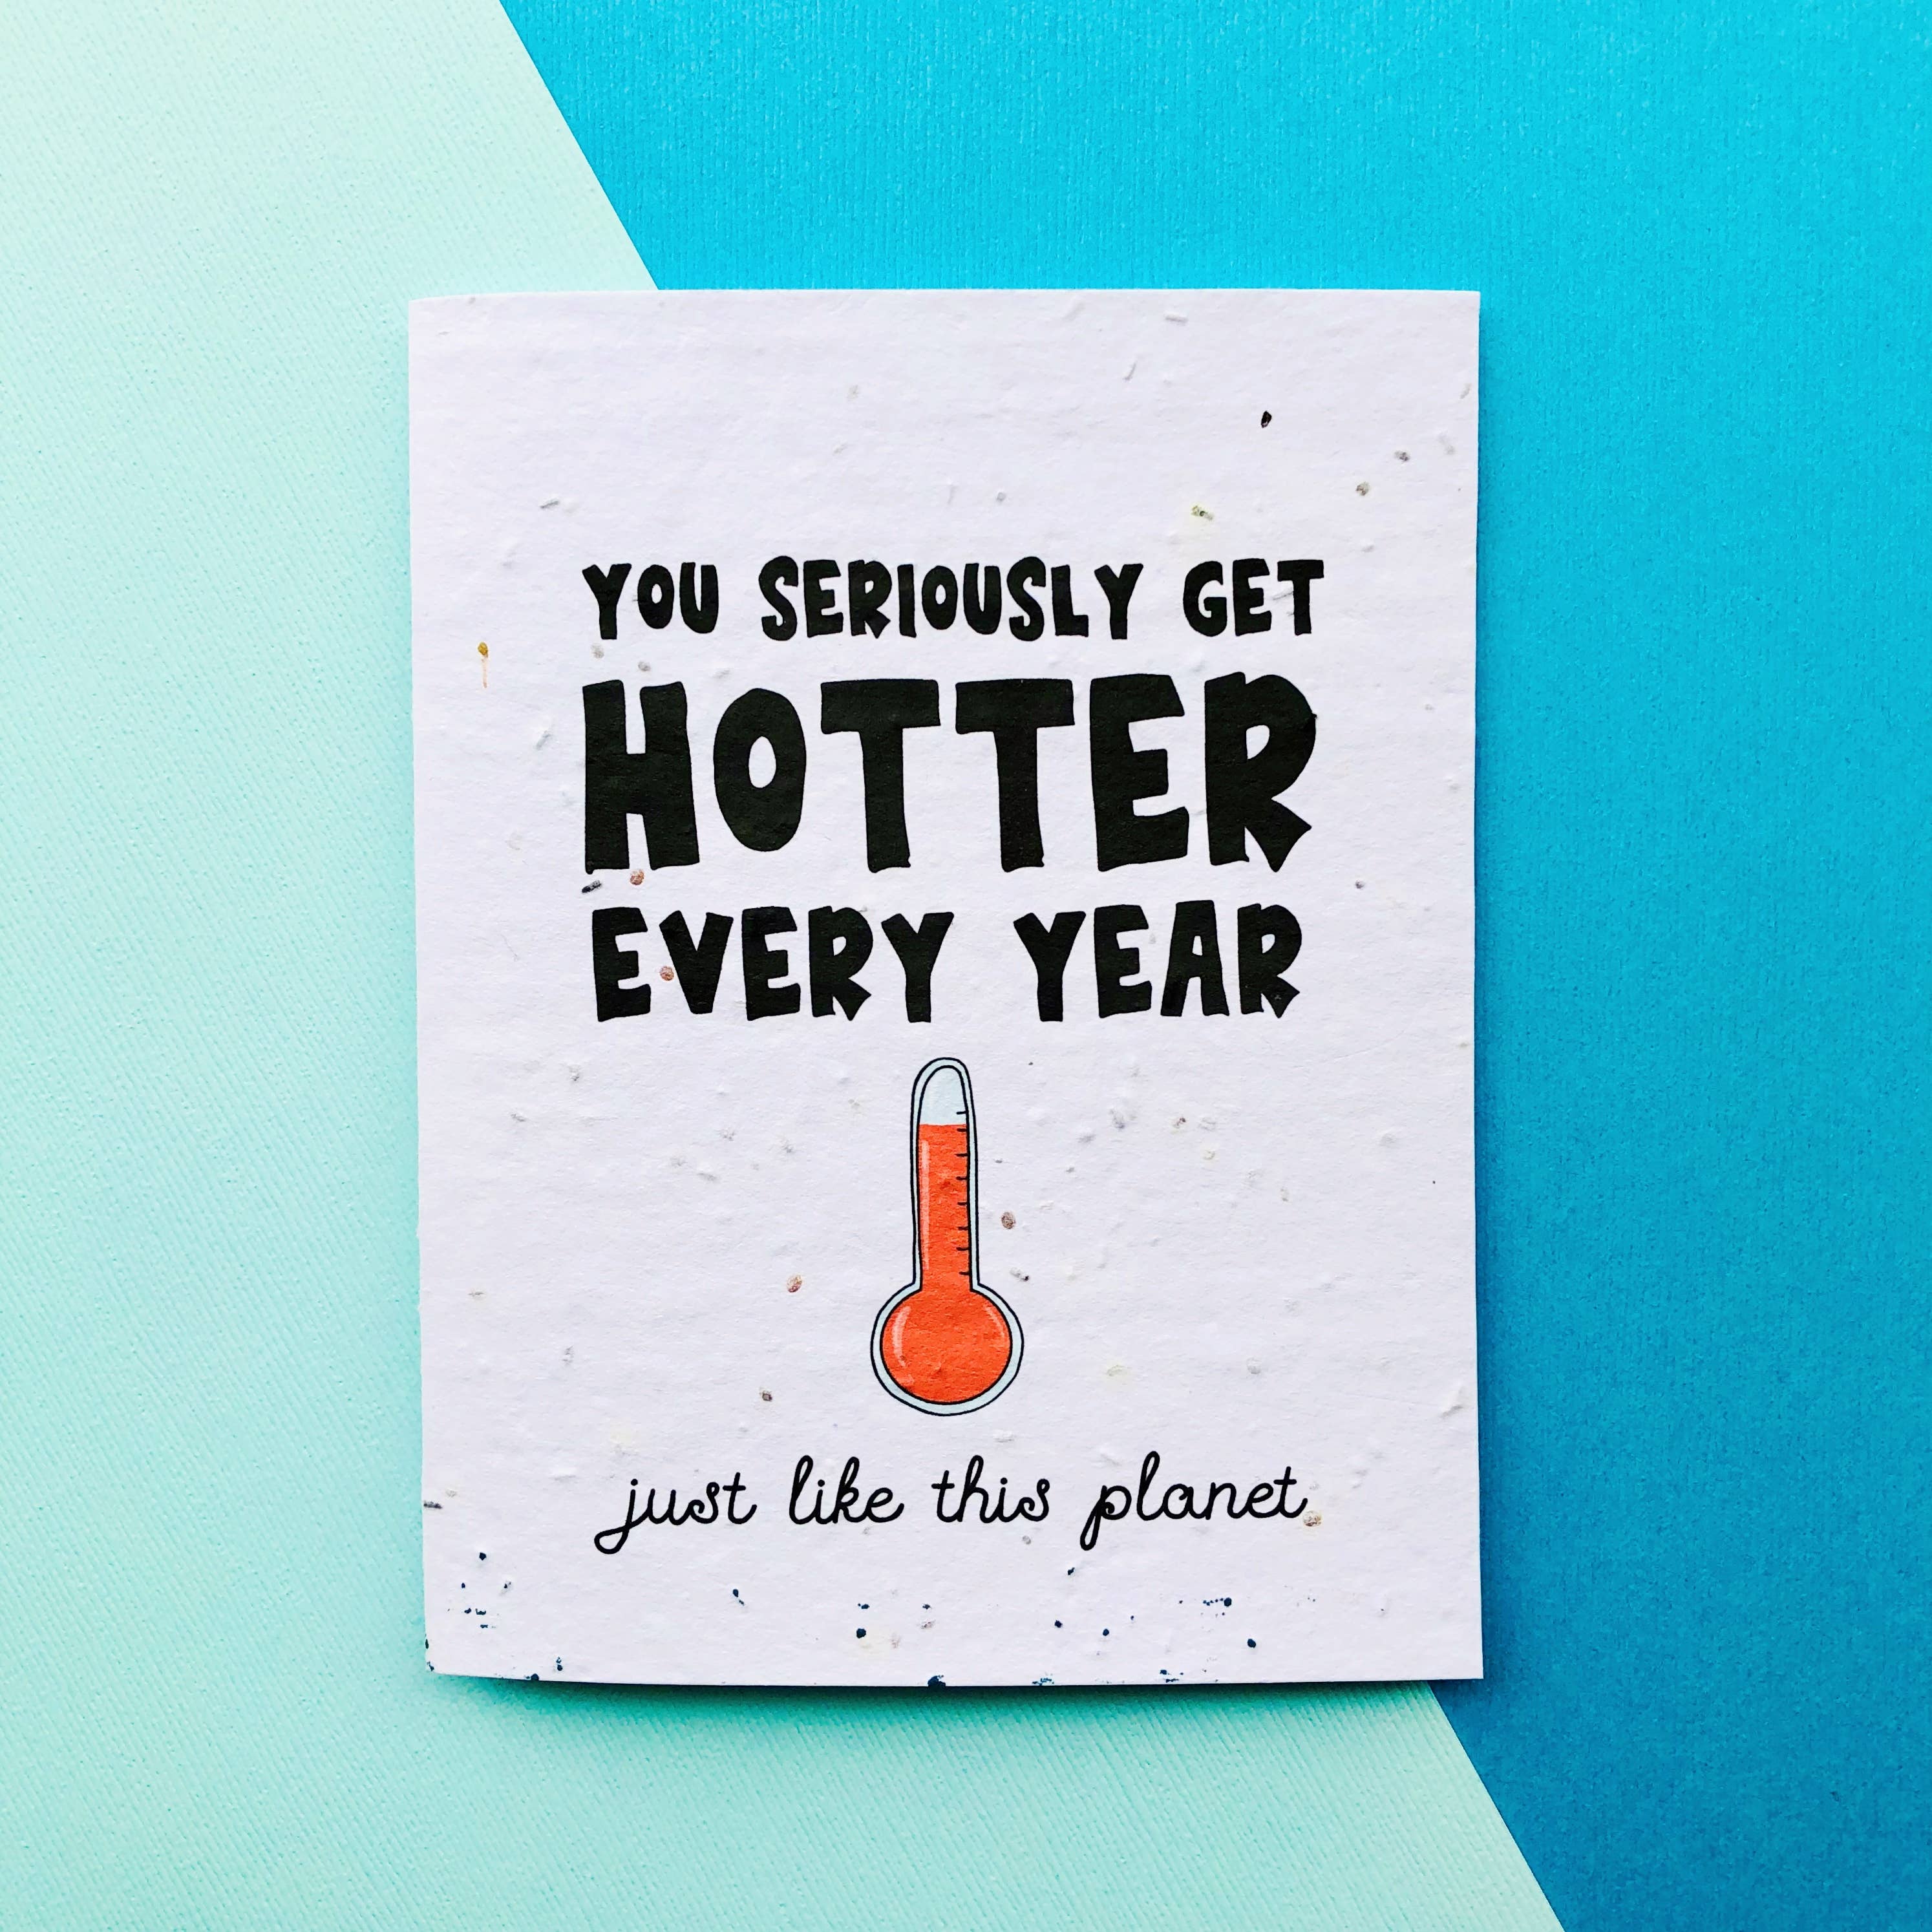 Top Hat and Monocle - Hotter Plantable Eco Friendly Valentines Day Card Sustainable Stationery